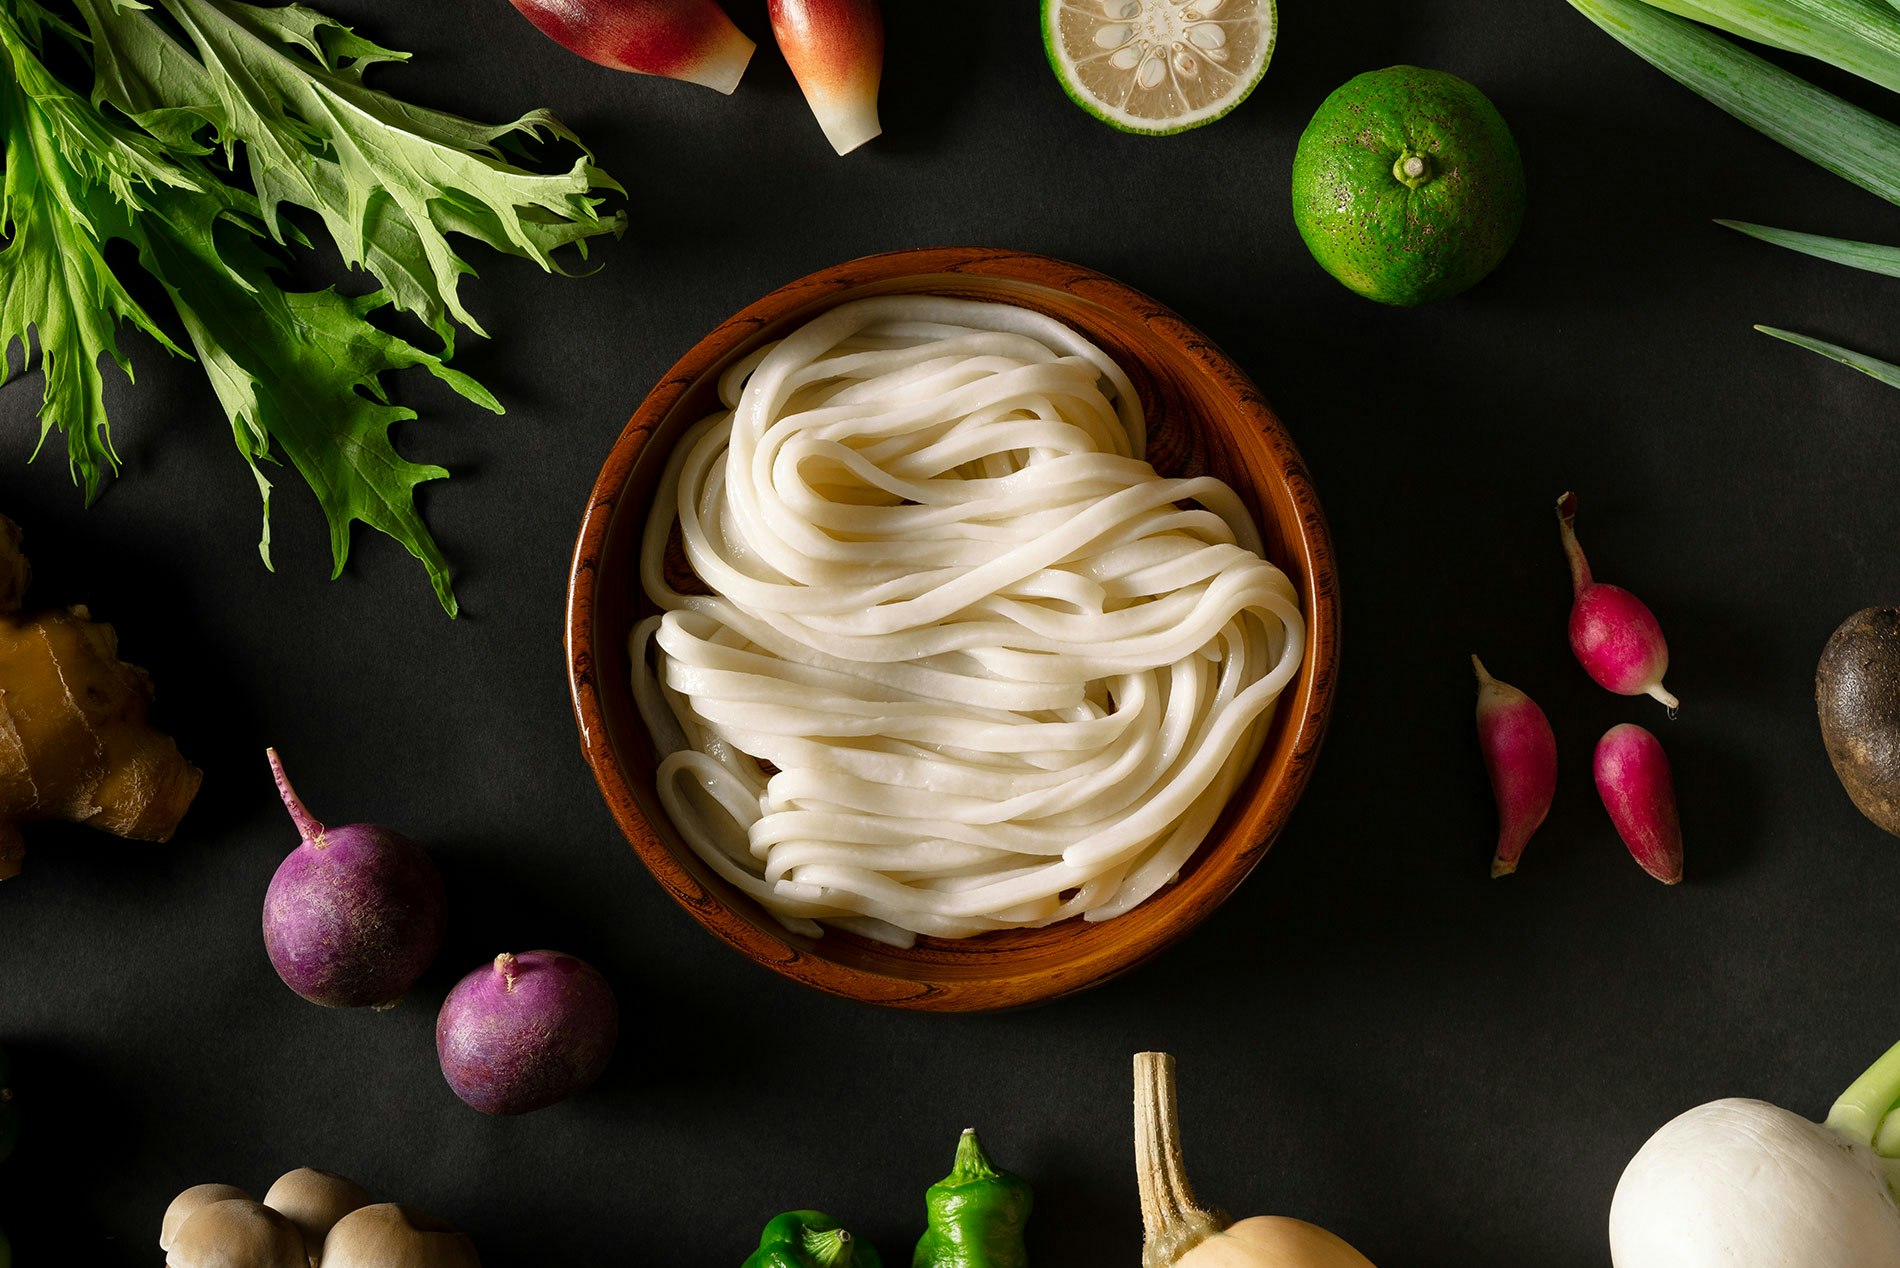 A bowl of noodles sits on a black table; it's surrounded by well-placed fresh vegetables.